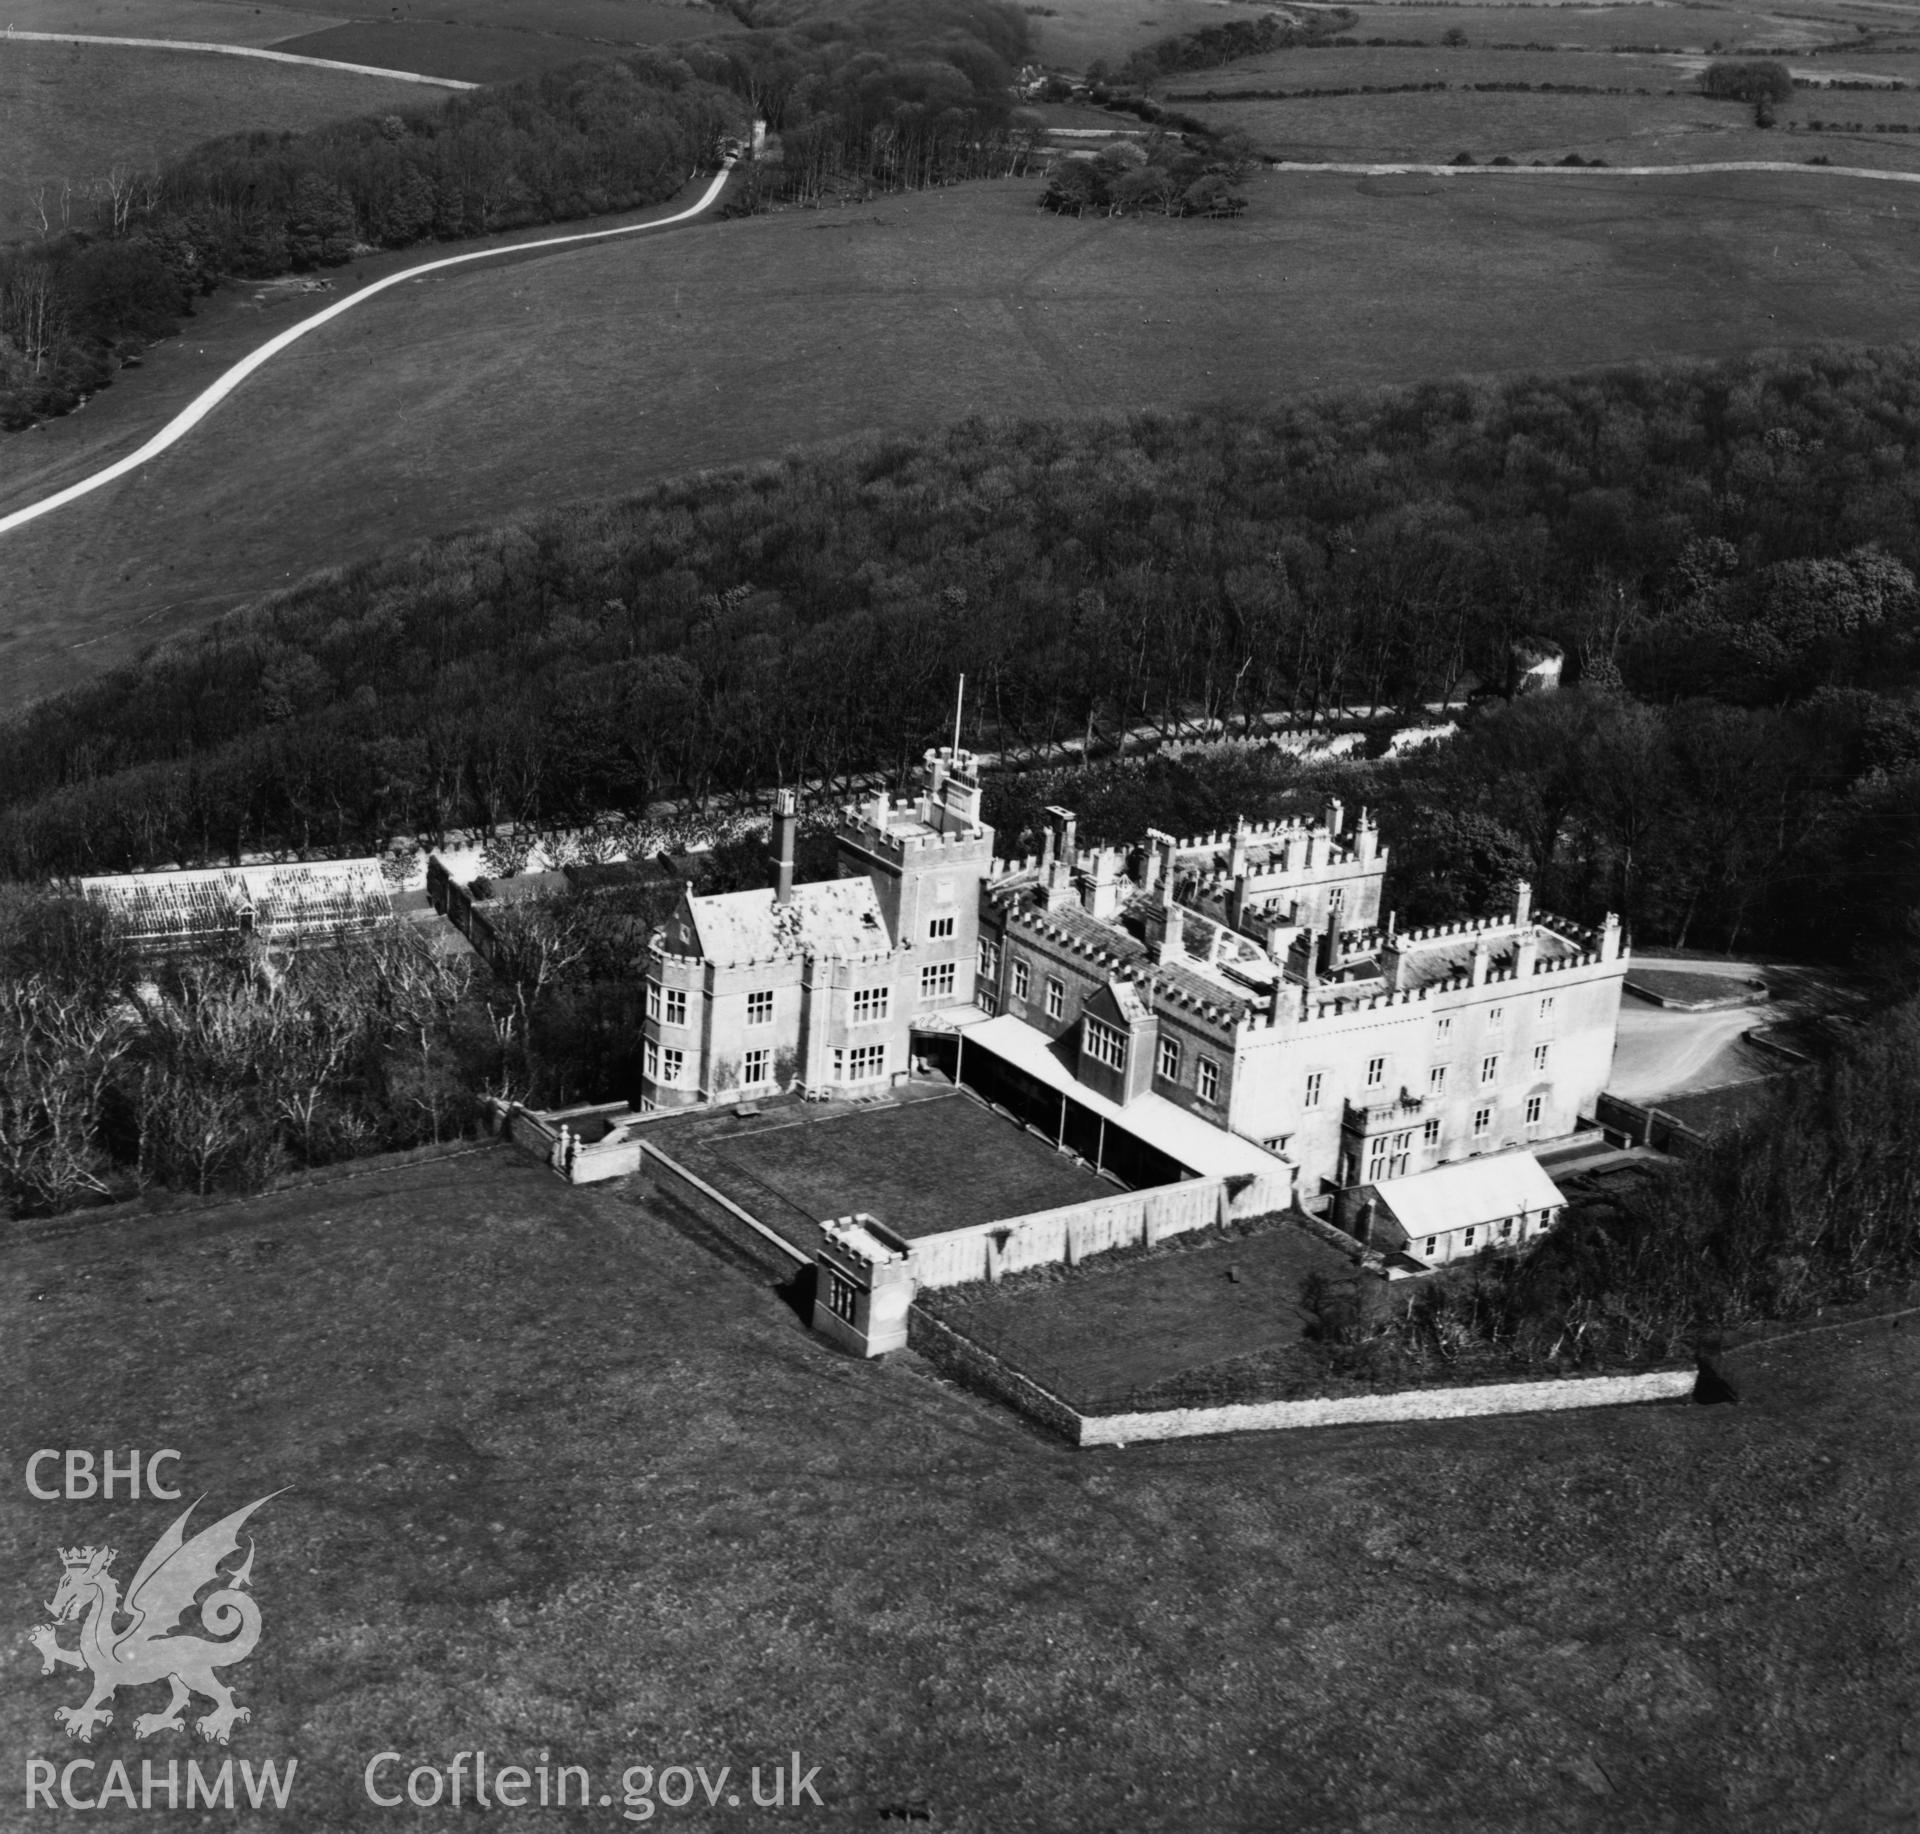 View of Dunraven Castle and gardens. Oblique aerial photograph, 5?" cut roll film.